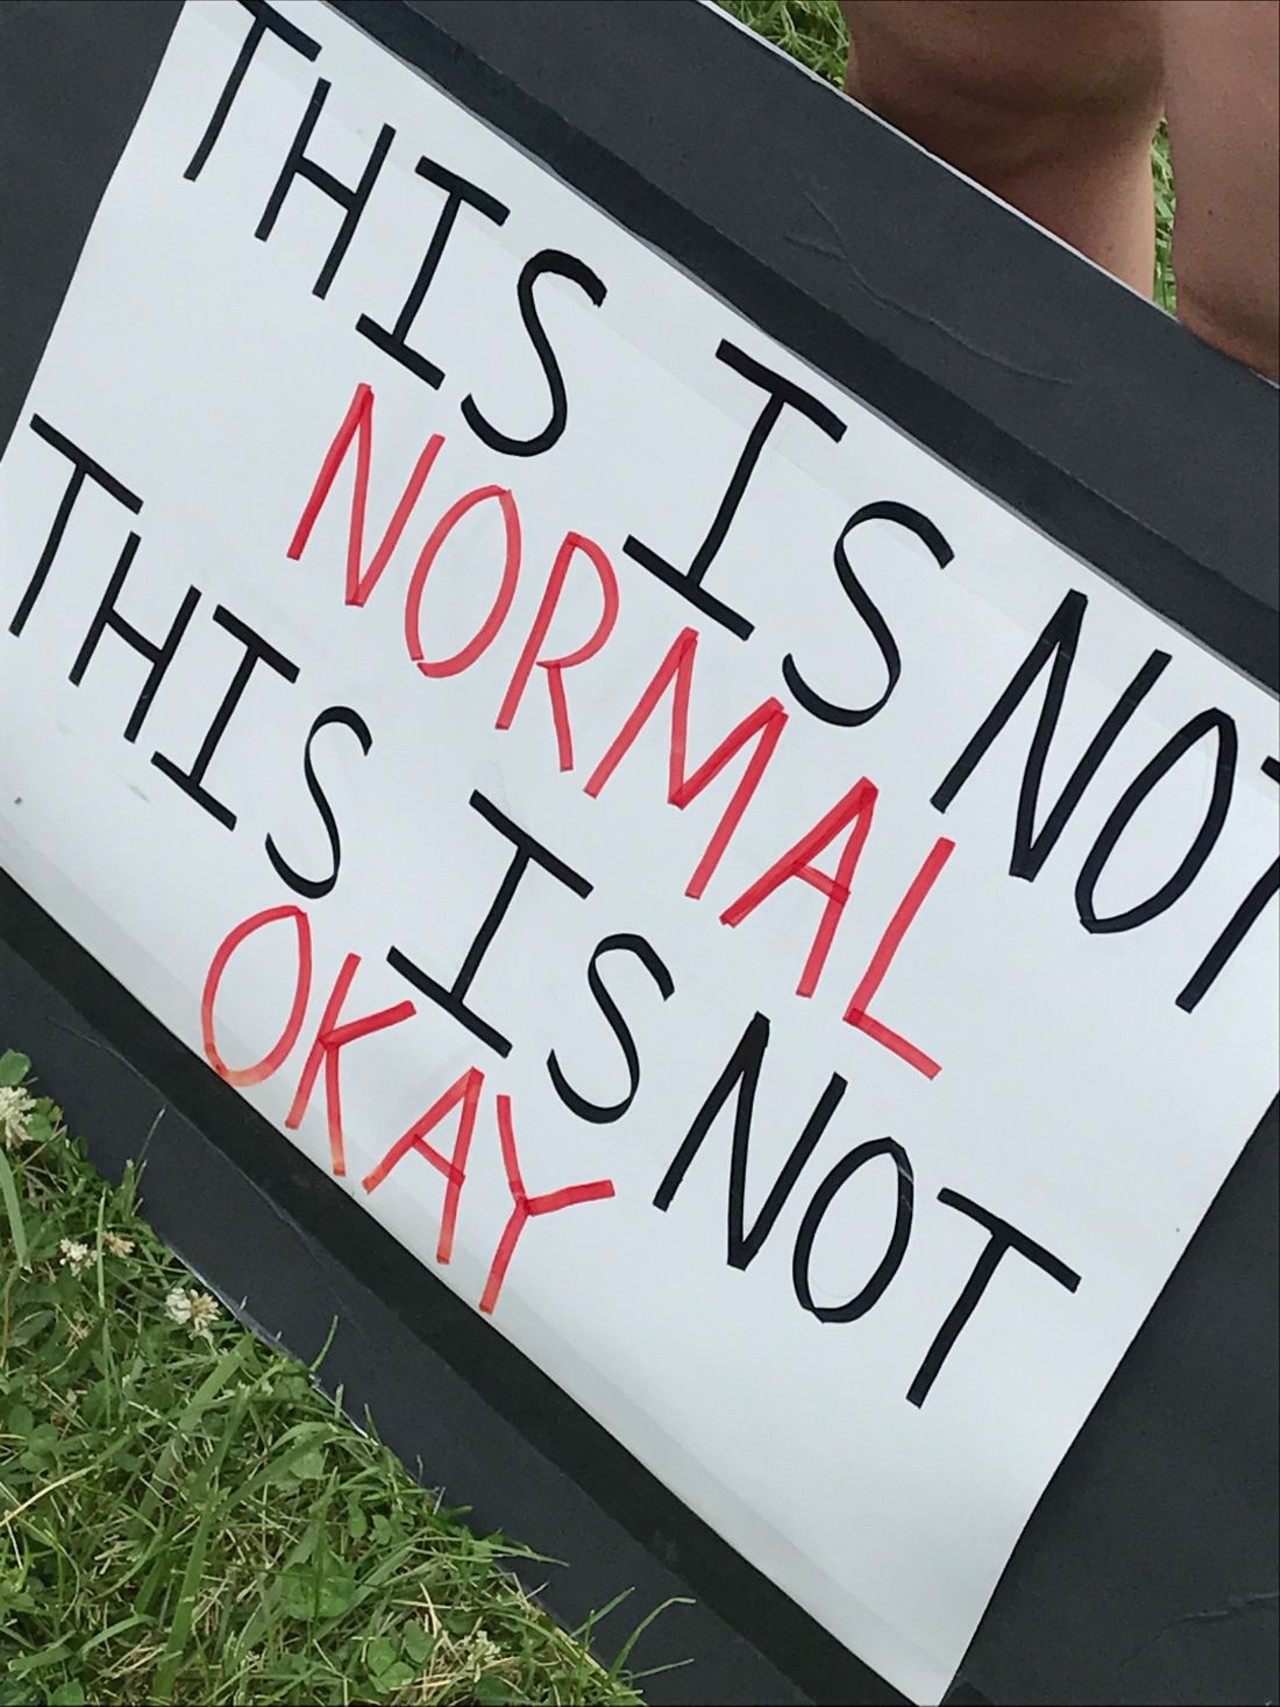 All the signs we saw at the 'Families Belong Together' rally in Detroit's Clark Park